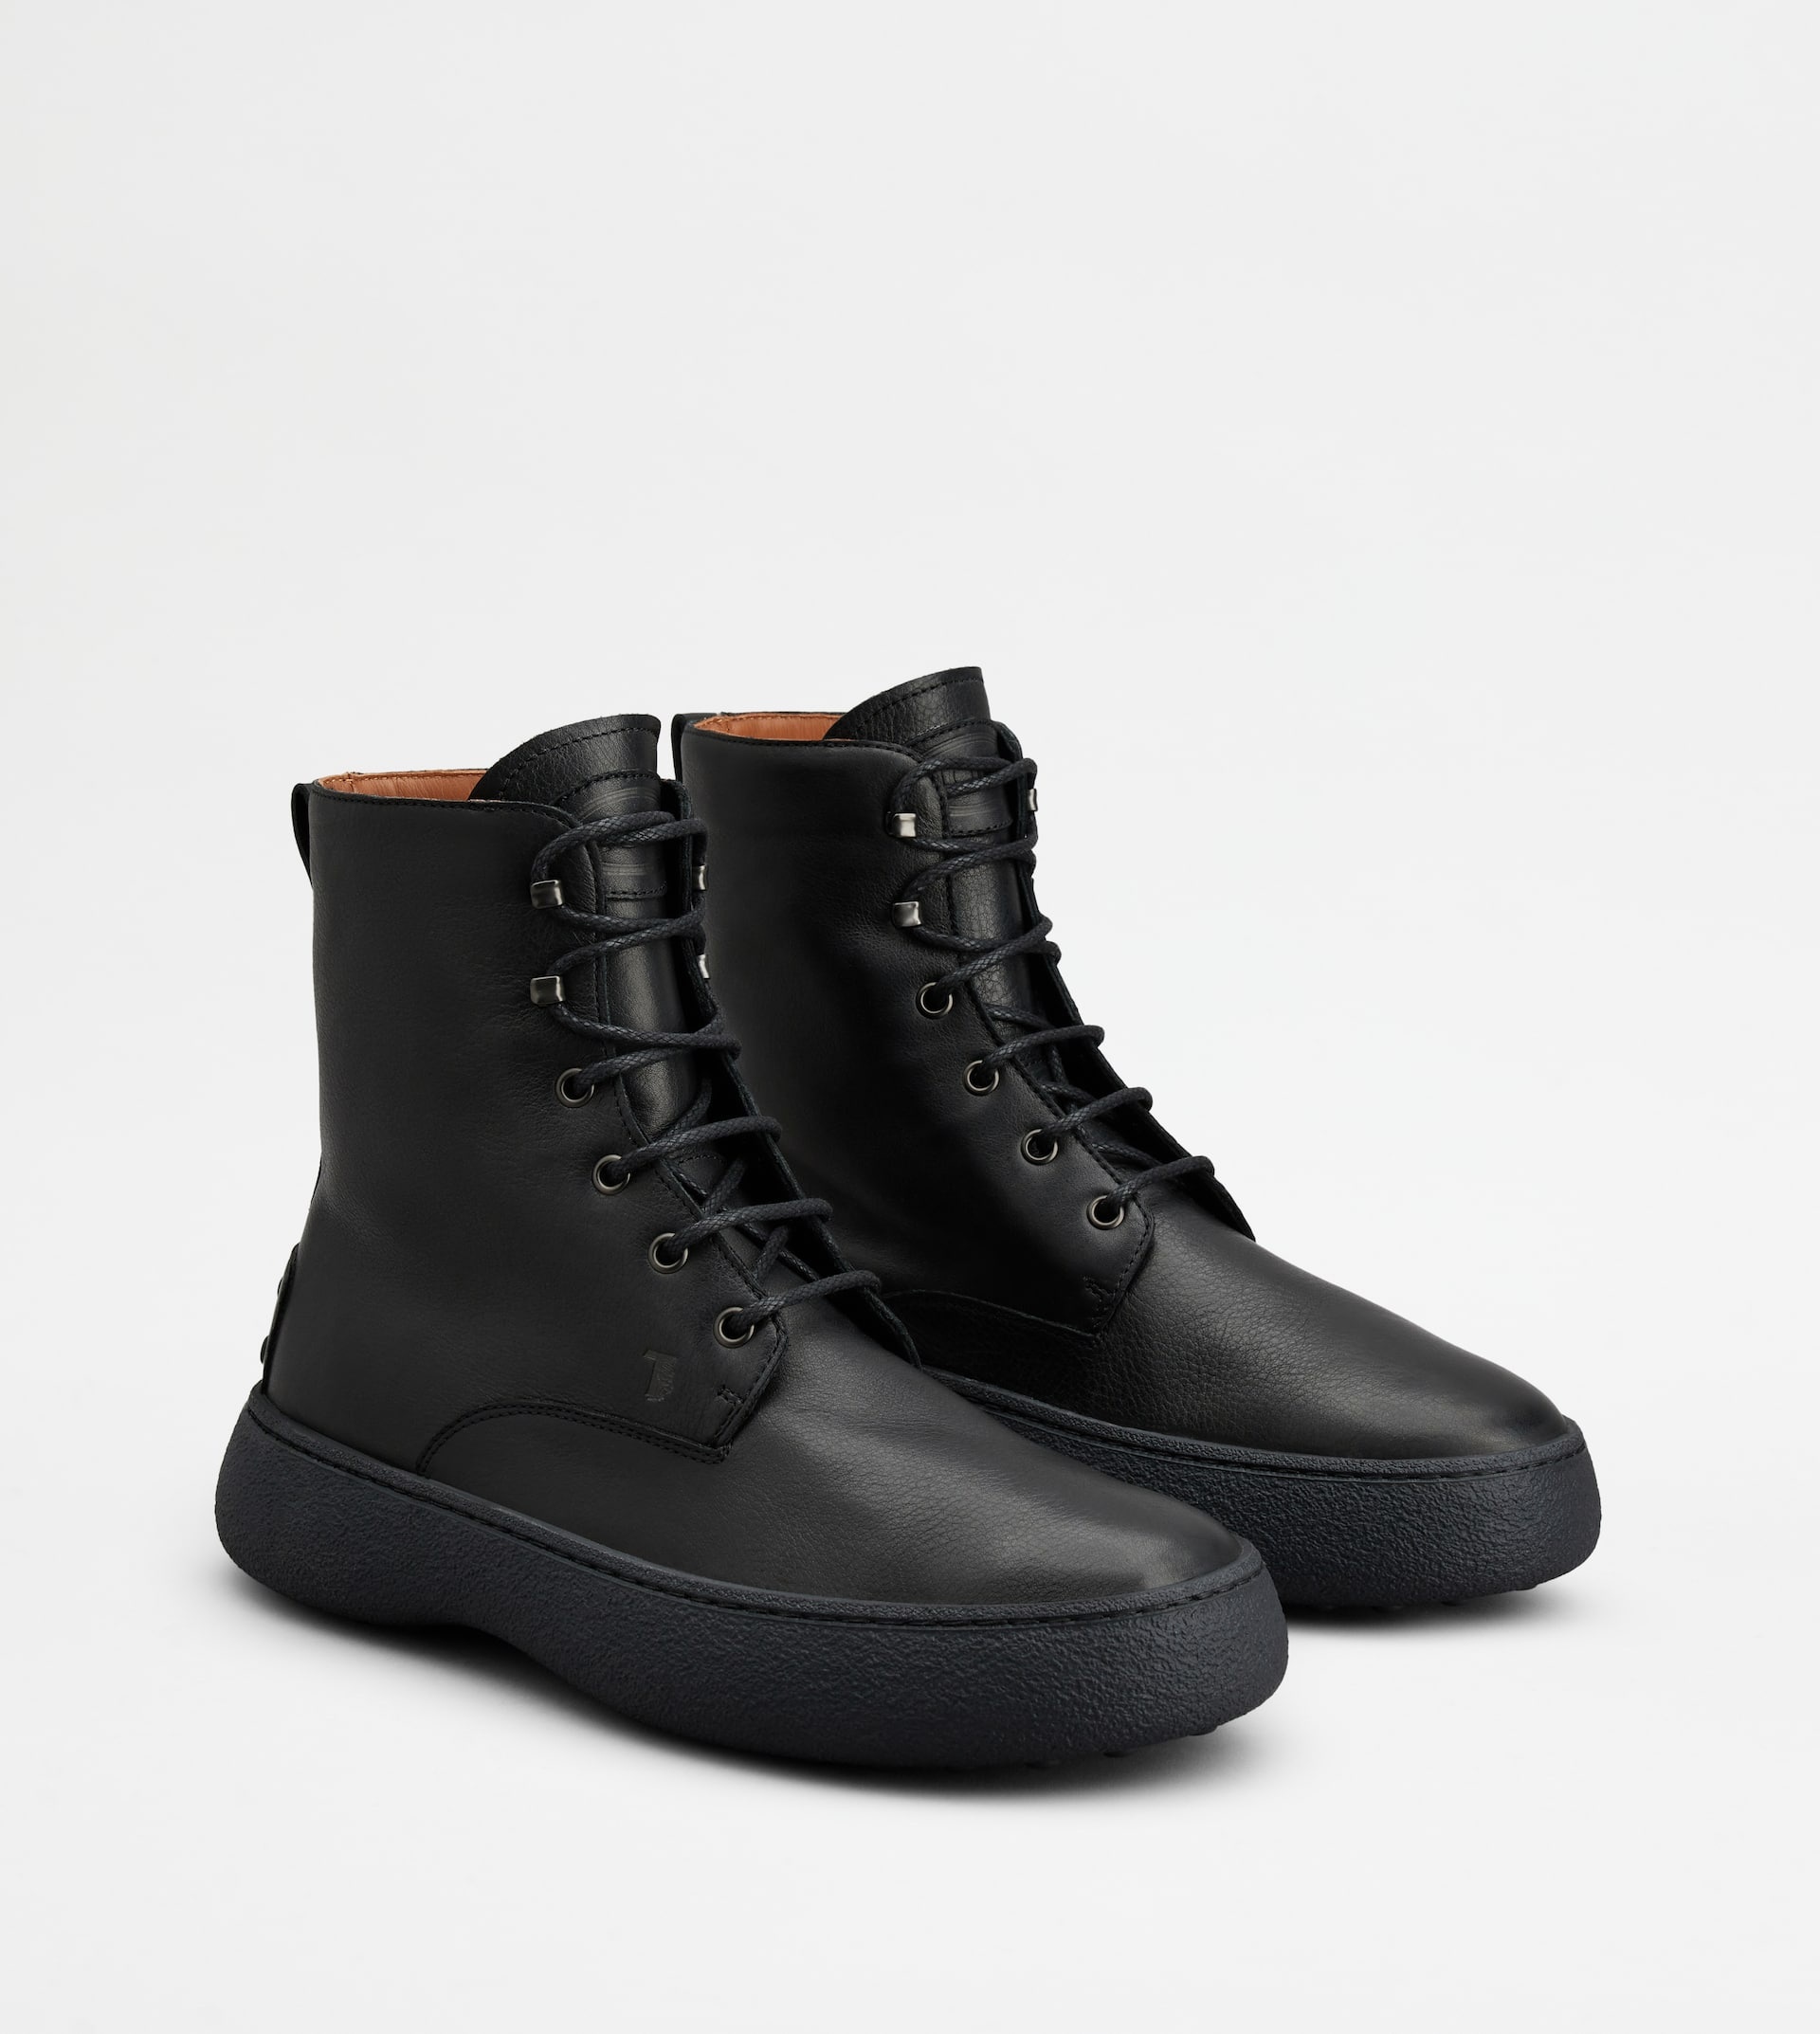 TOD'S W. G. LACE-UP ANKLE BOOTS IN LEATHER - BLACK - 3